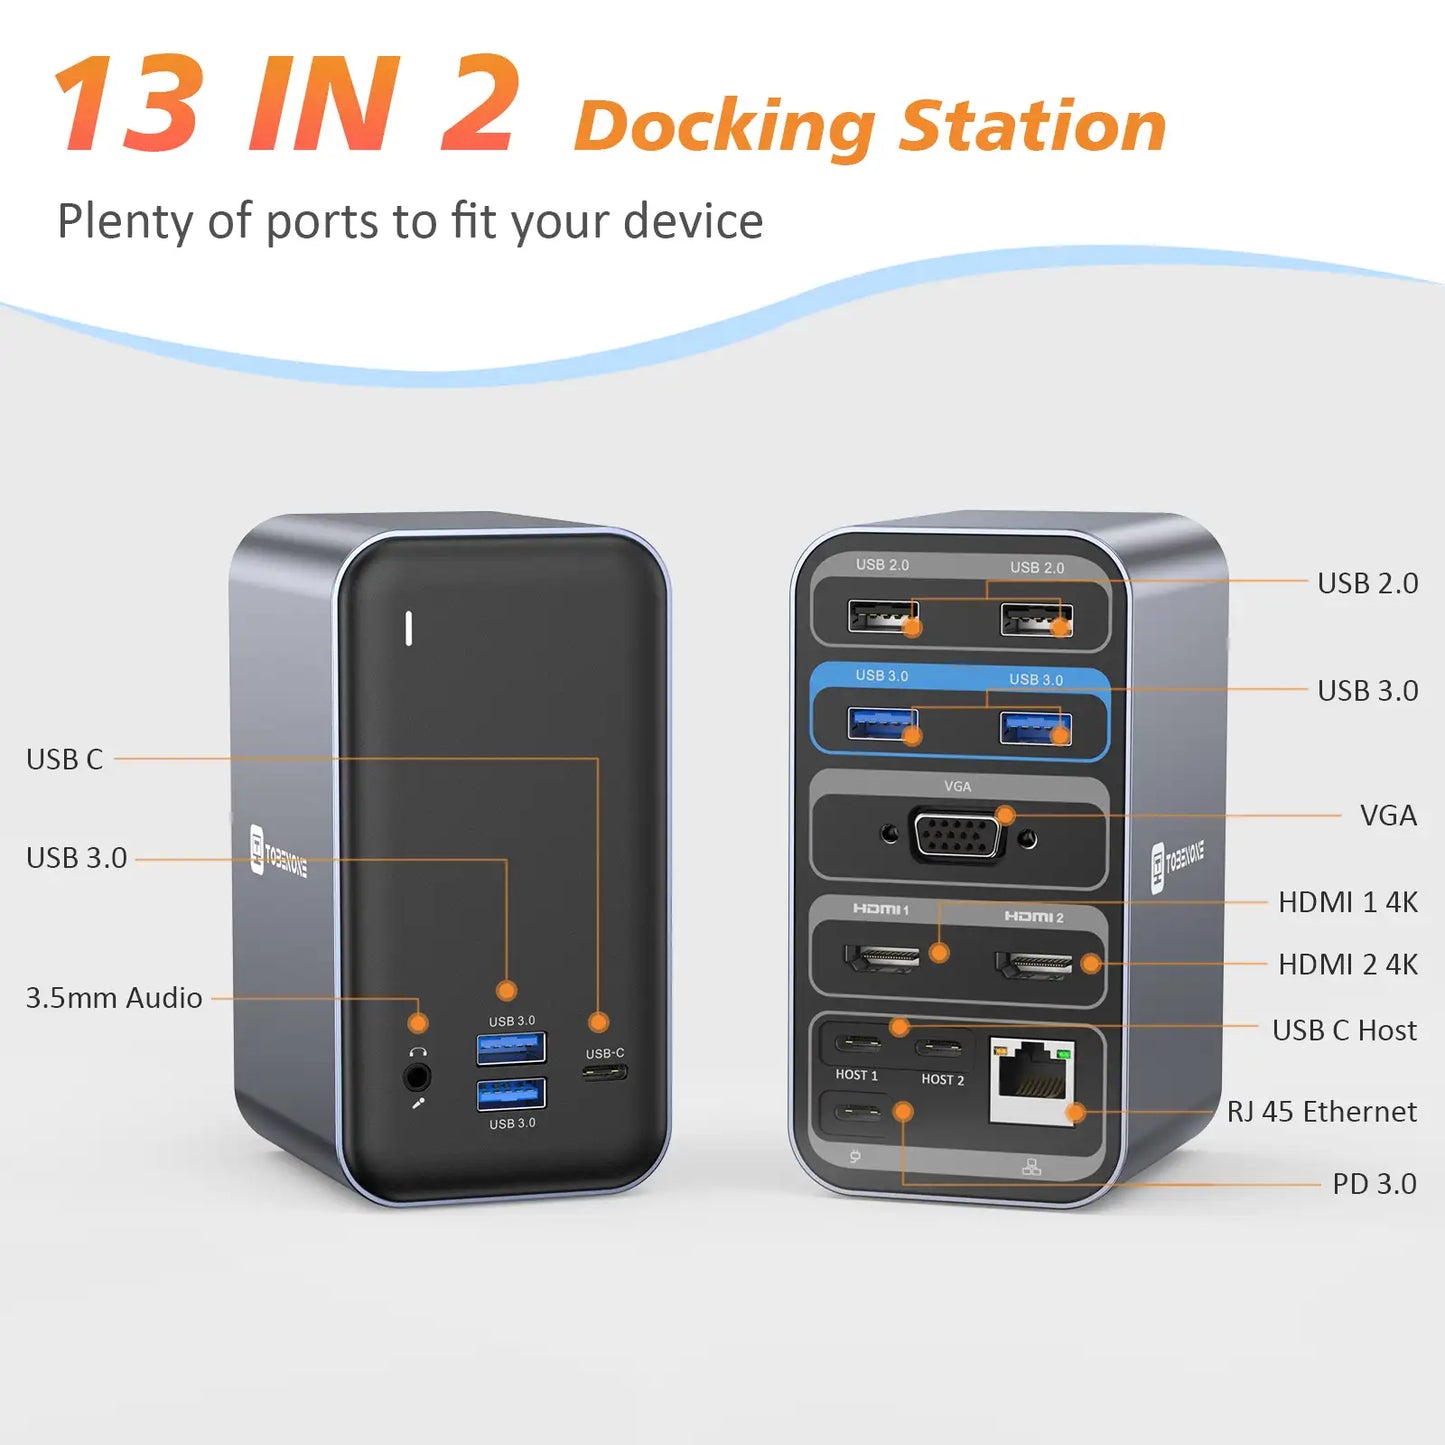 13 in 2 docking station for macbook